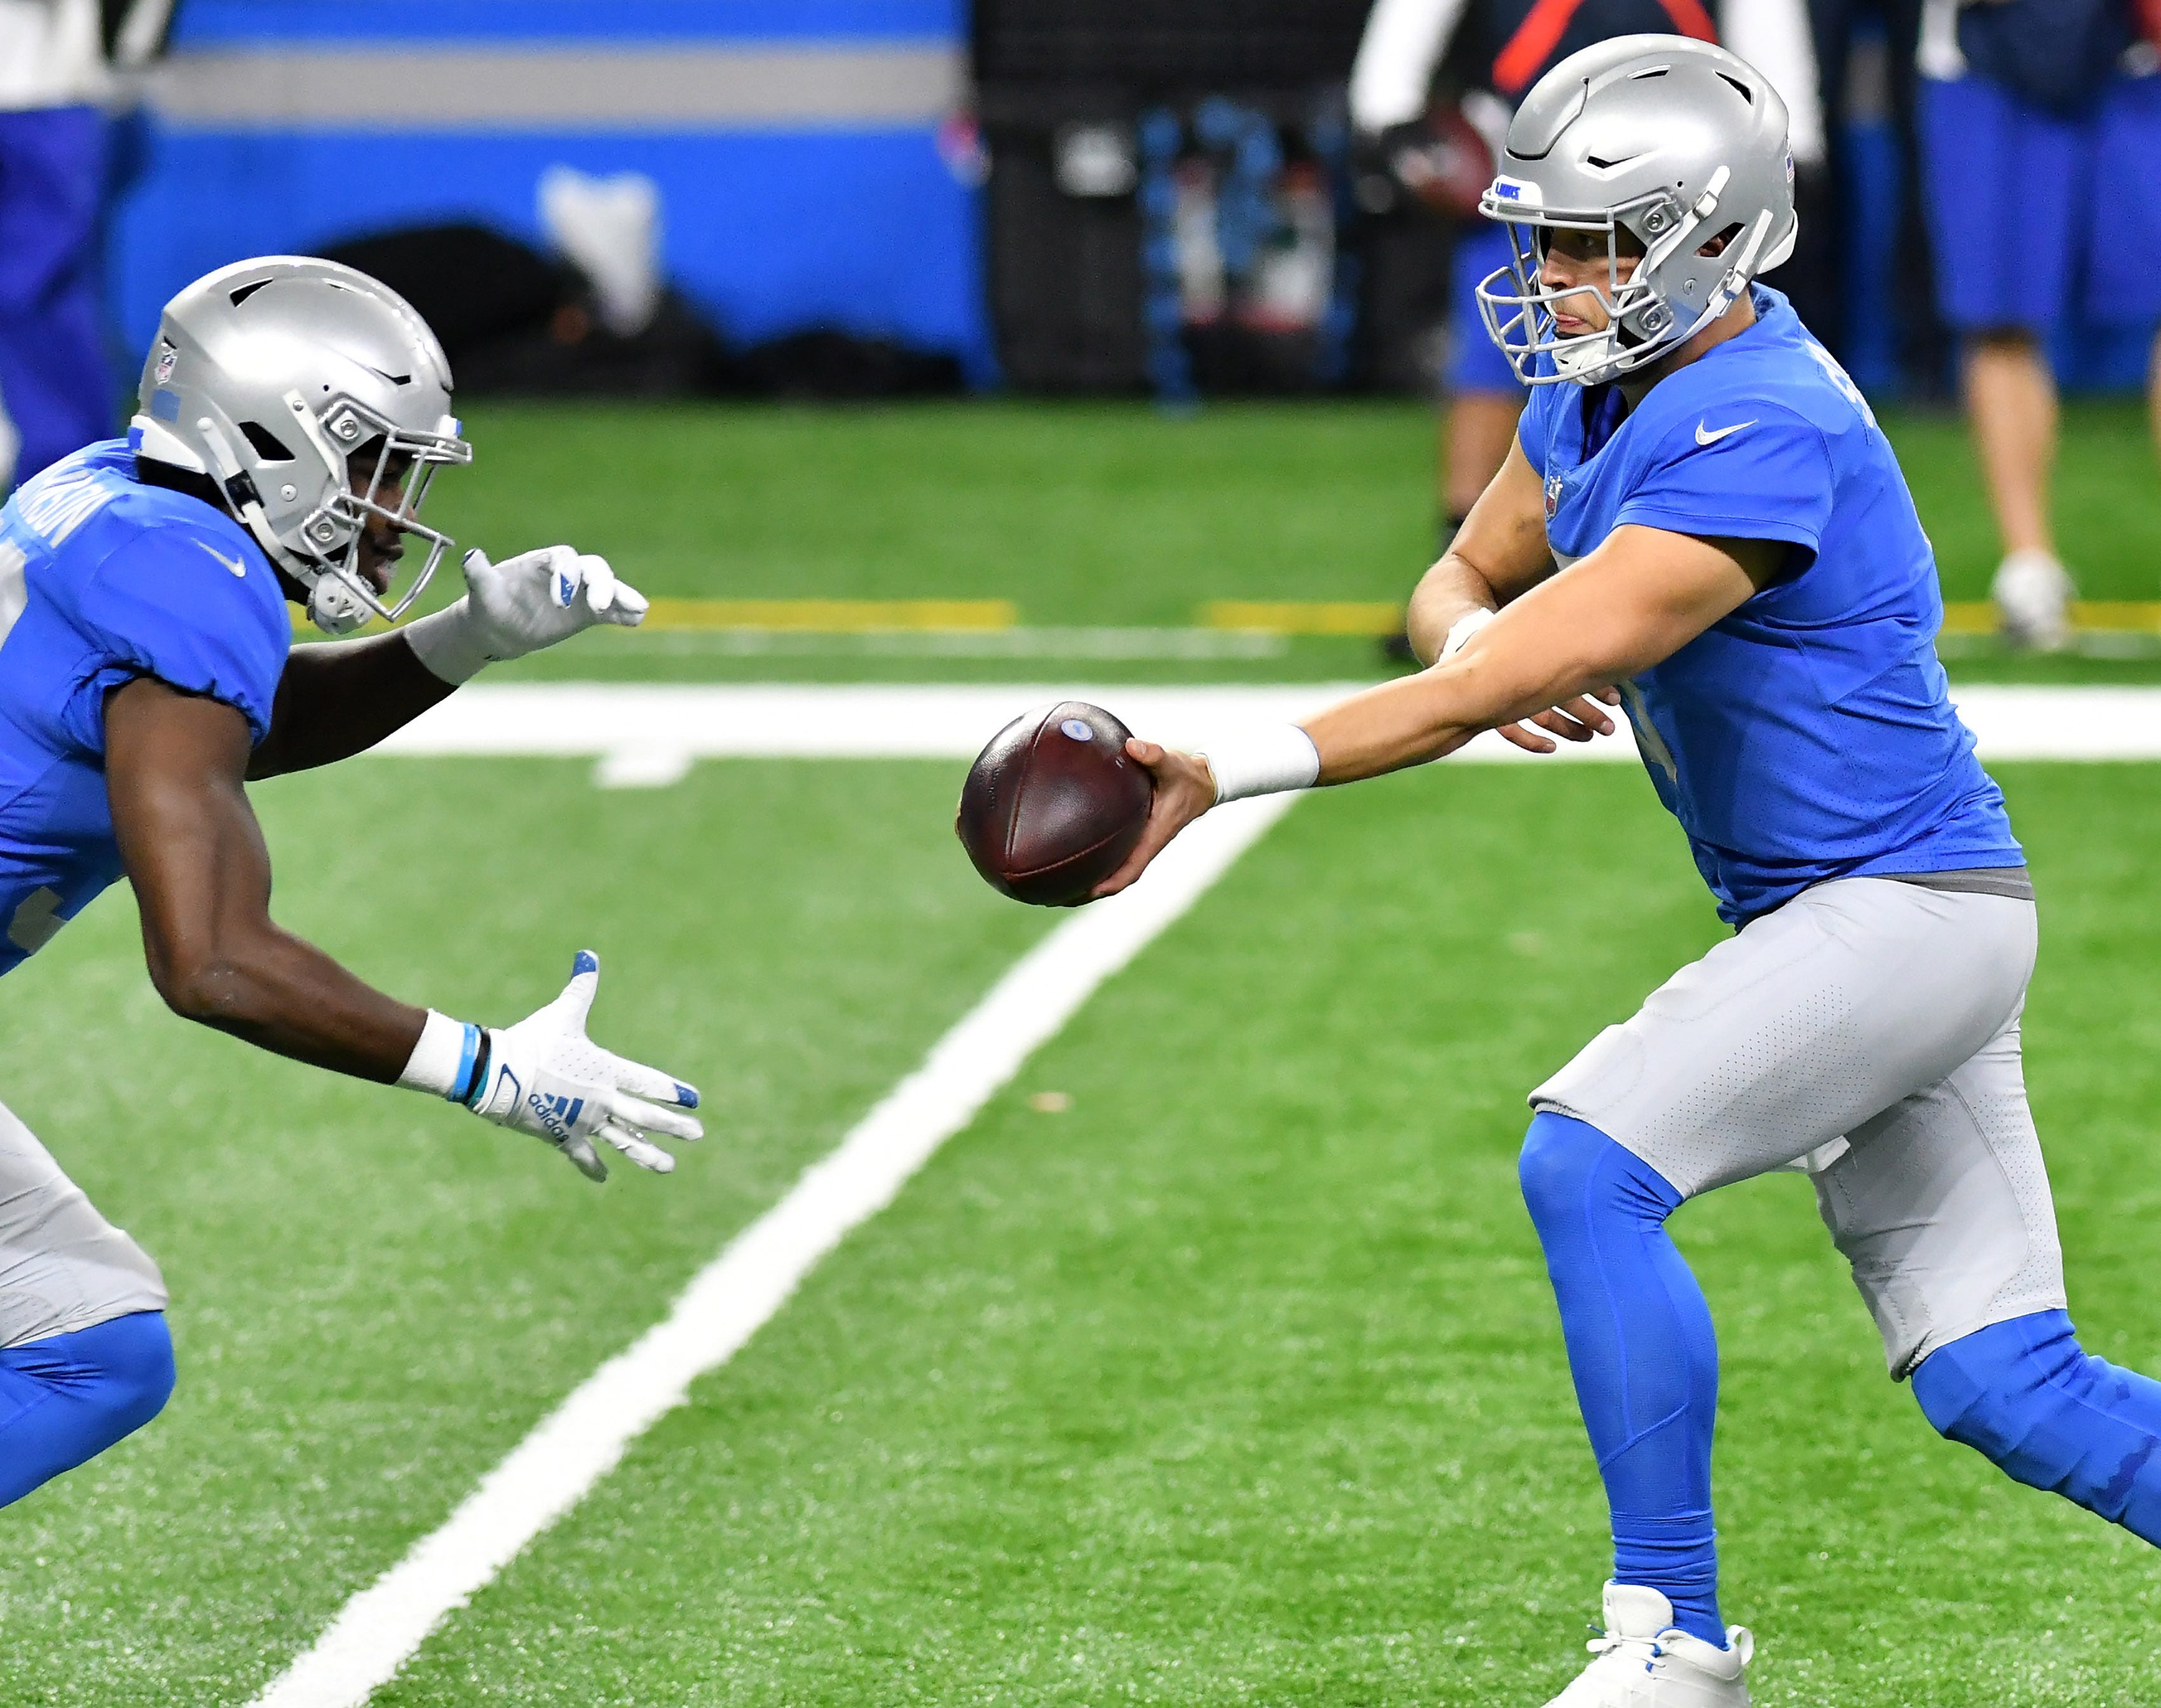 Lions quarterback Matthew Stafford (9) hands off to Lions running back Kerryon Johnson (33)  in the first half.  Detroit Lions vs Houston Texans on Thanksgiving Day at Ford Field in Detroit on Nov. 26, 2020.